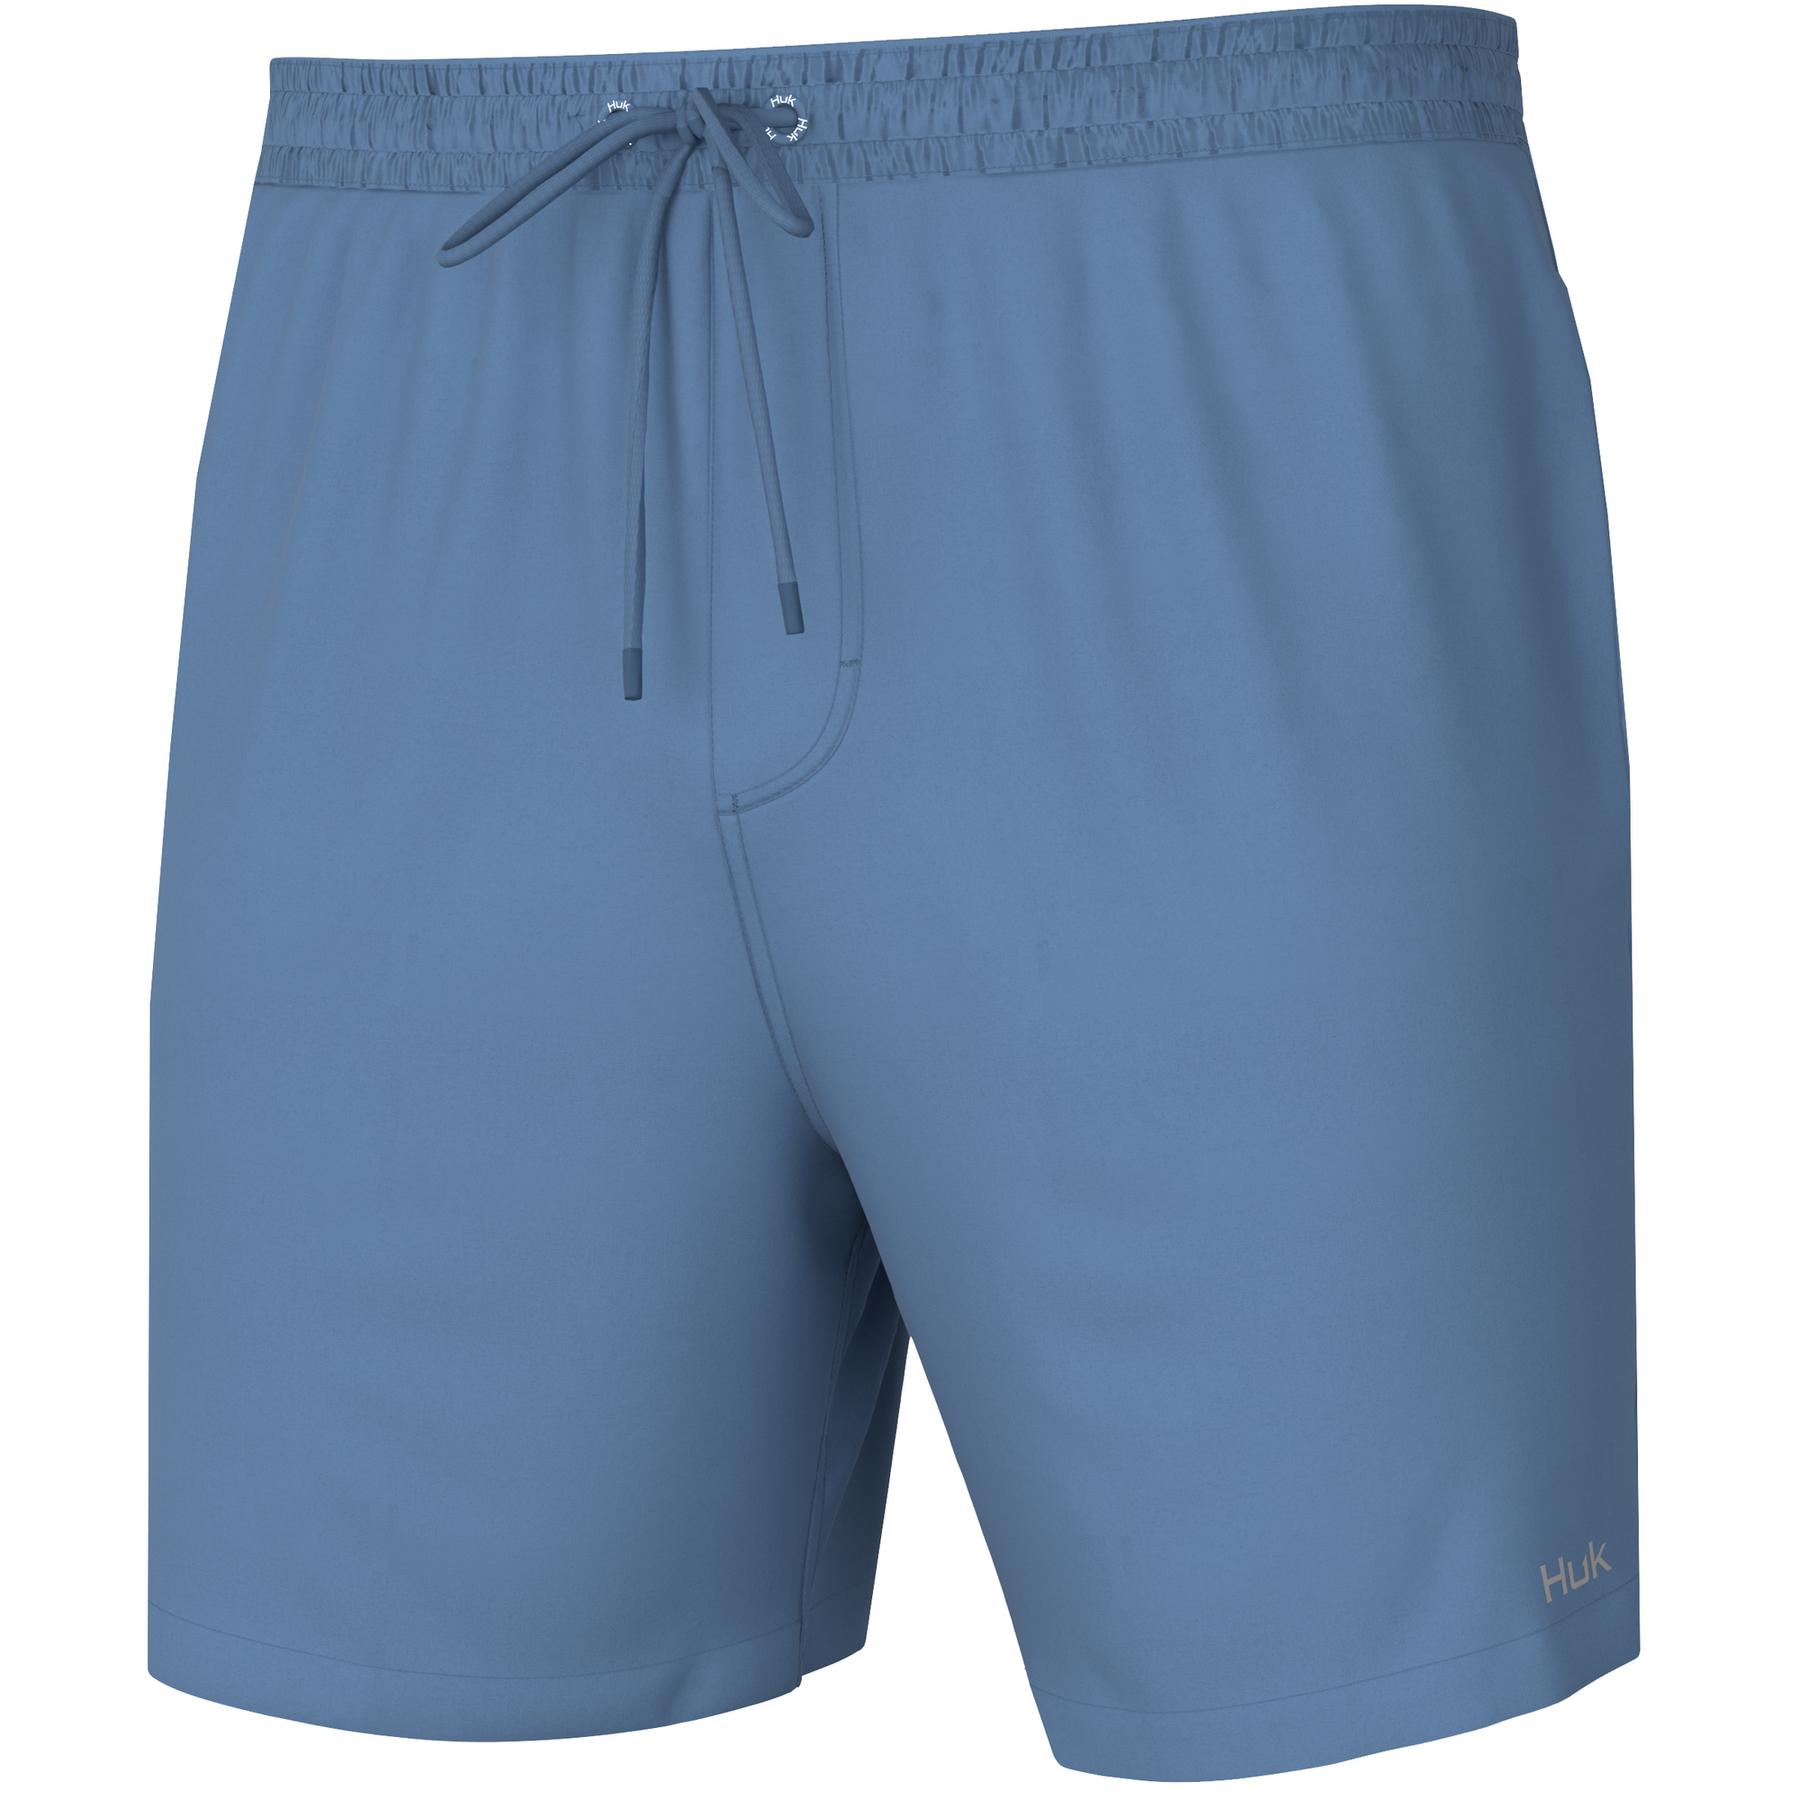 Buy quite-harbor HUK PURSUIT VOLLEY SHORTS